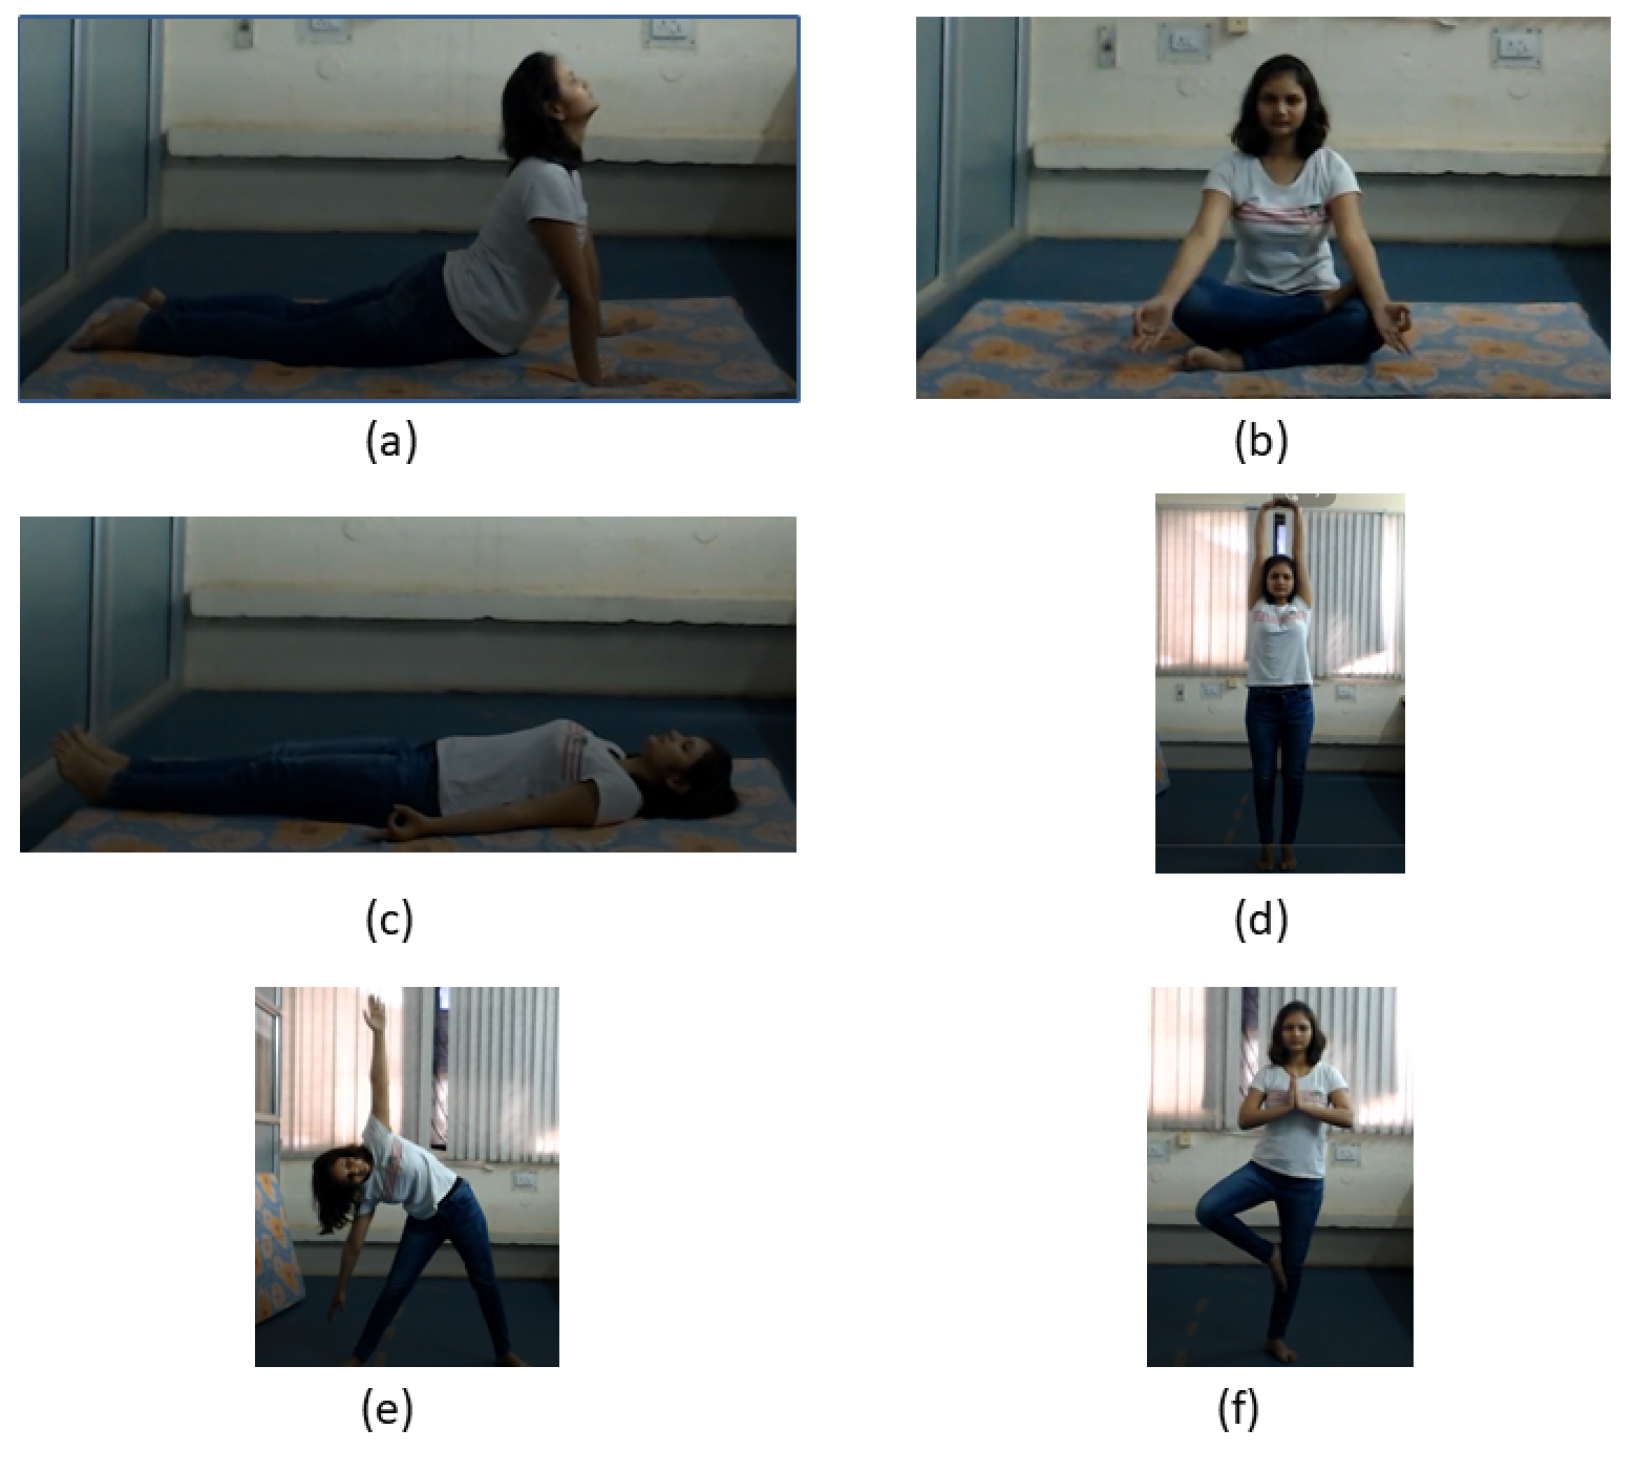 Yoga Sequence for Healing the Bladder and Kidneys